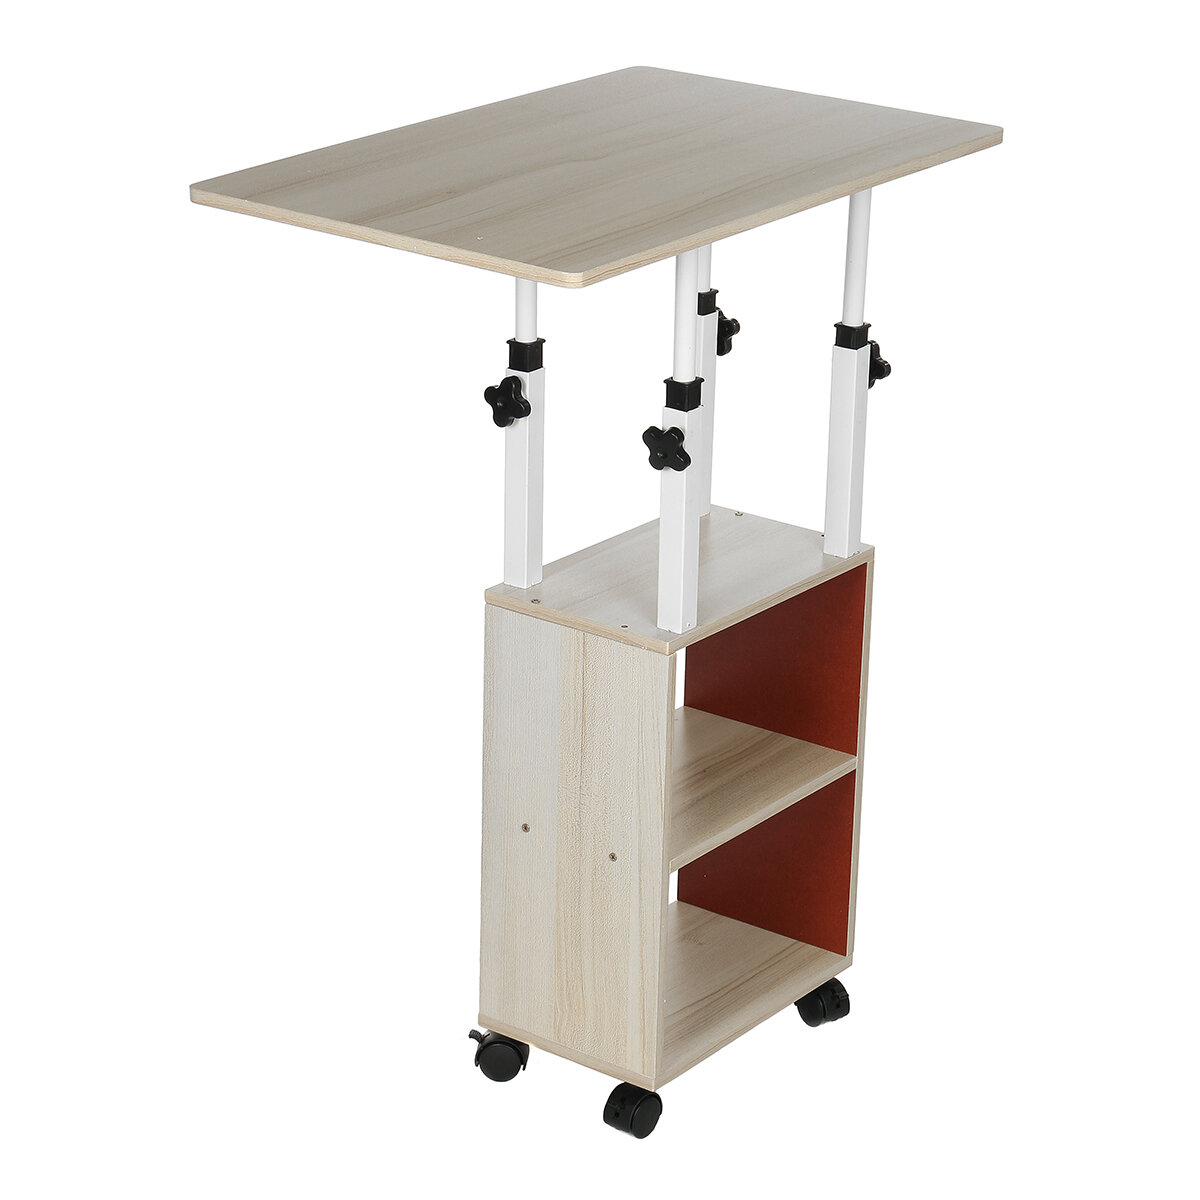 Image of Bedside Table Movable Simple Small Table Bedroom Home Simple Student Lifting Dormitory Table for Home Office